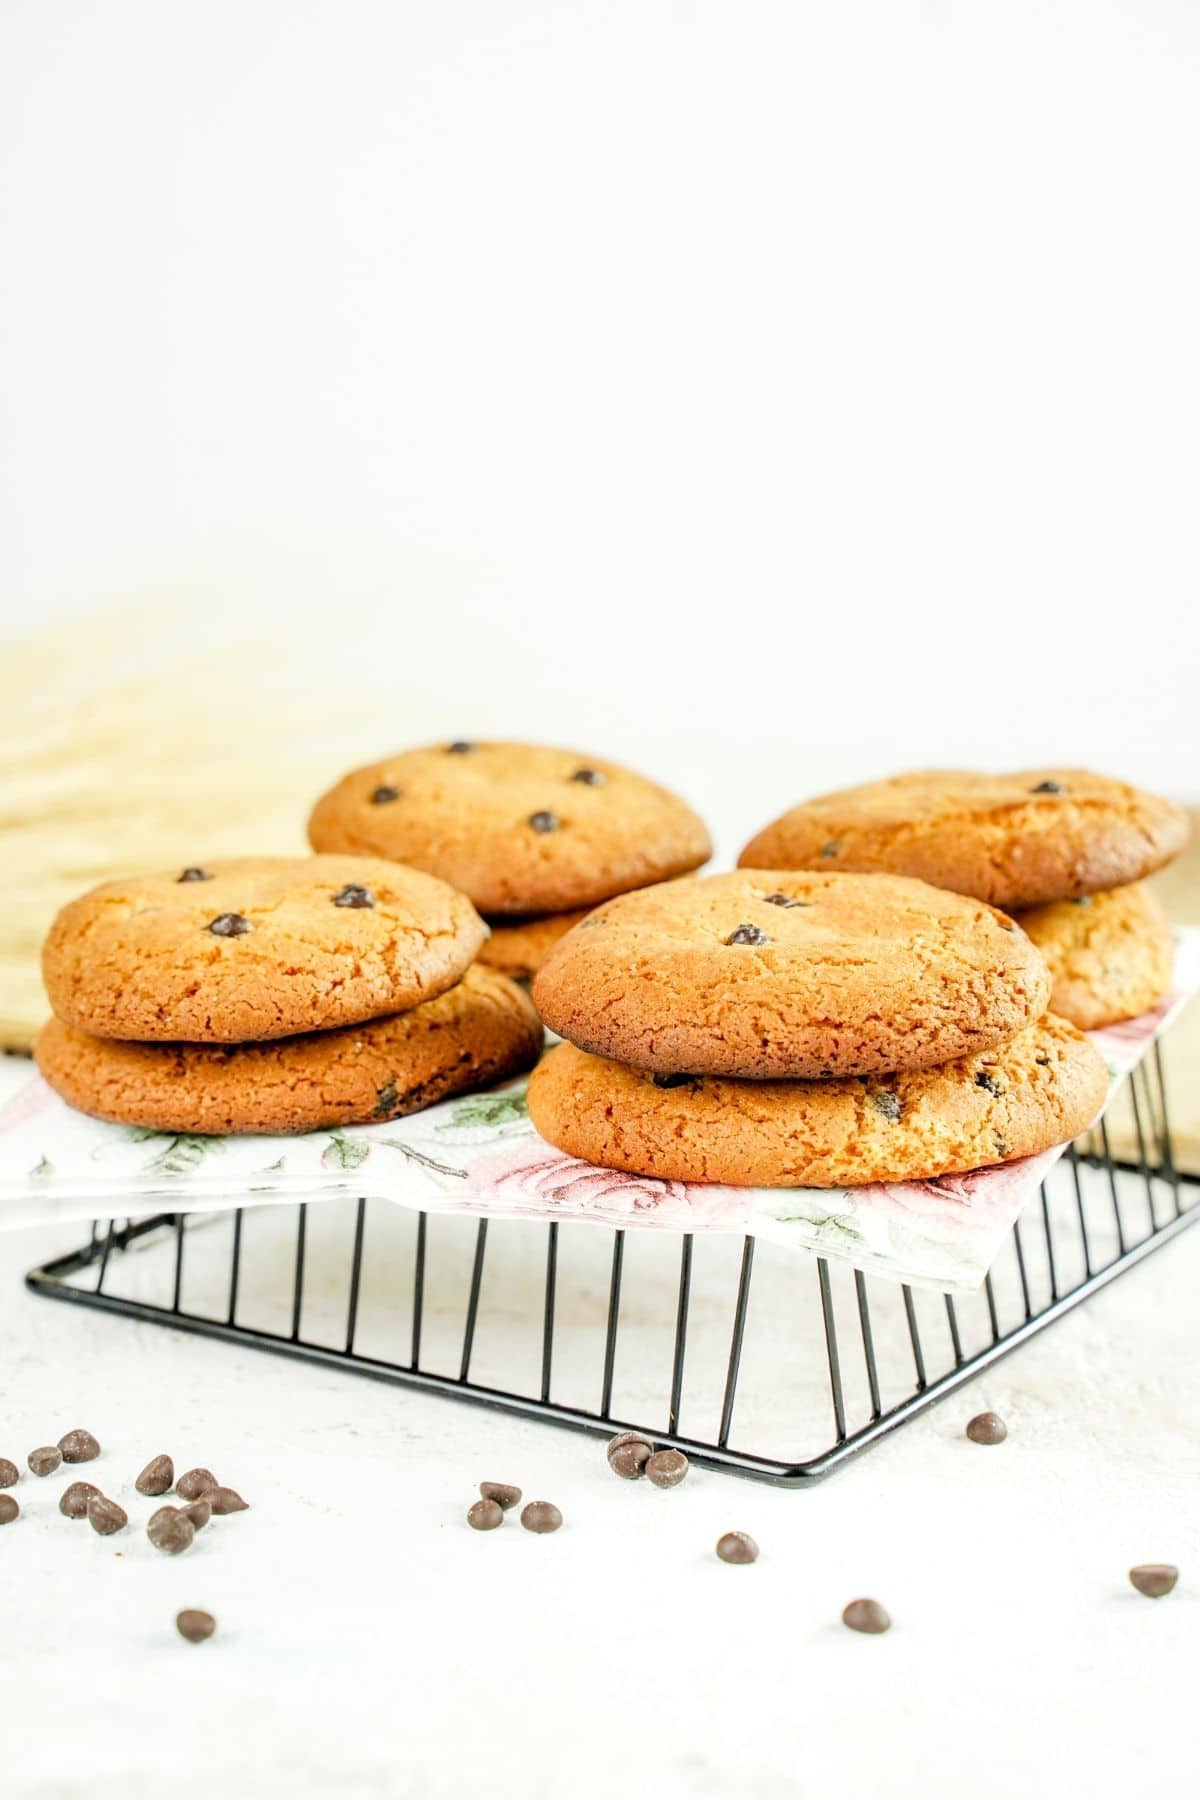 stacks of chocolate chip cookies on paper on wire rack